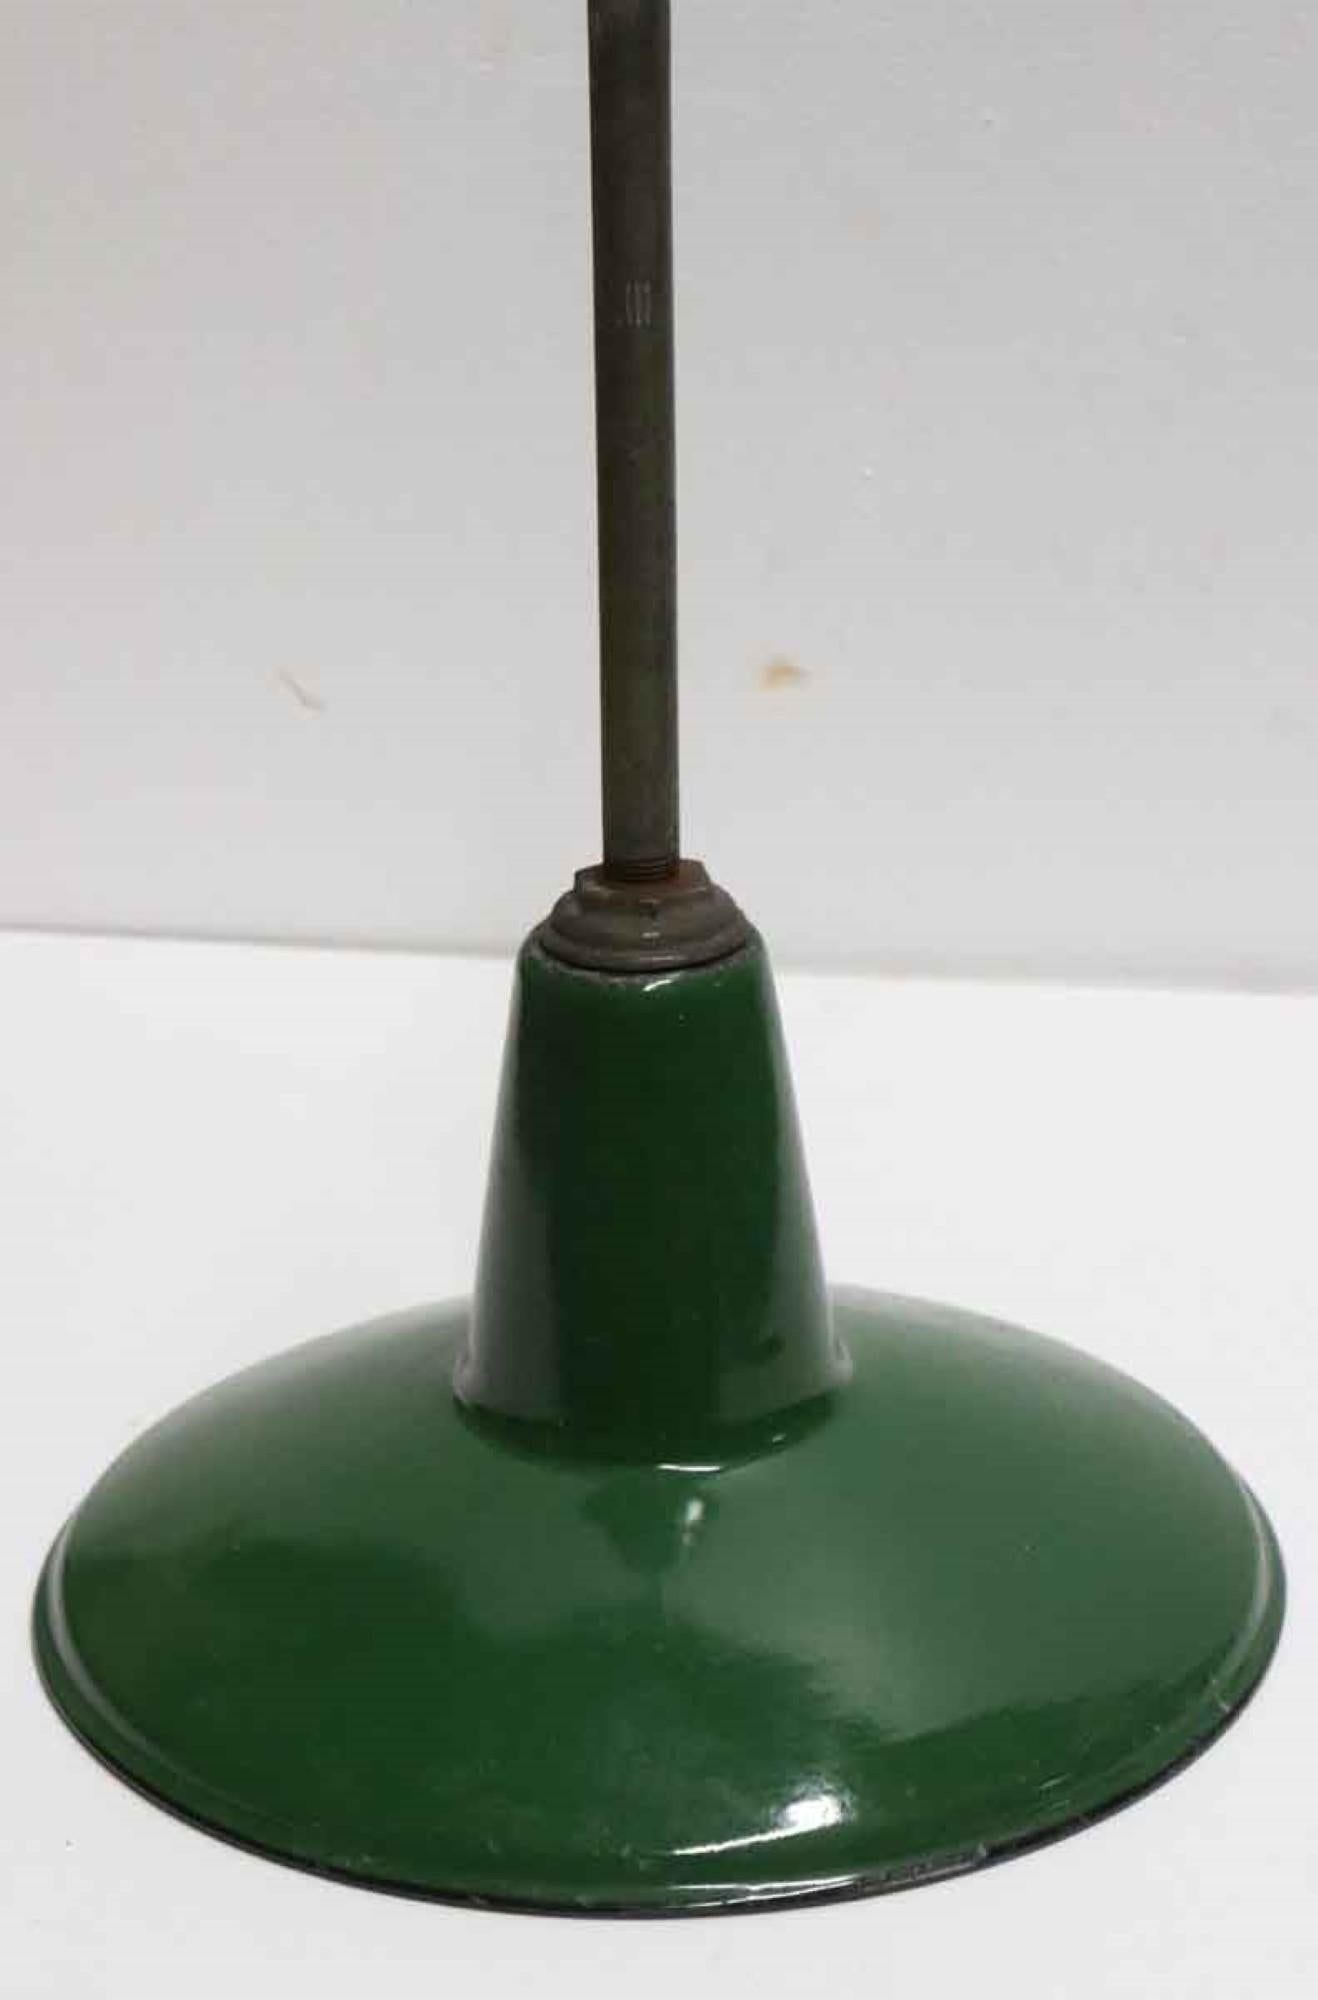 American 1970s Vintage Industrial Steel Pendant Light with a Green Enamel Finish, Qty